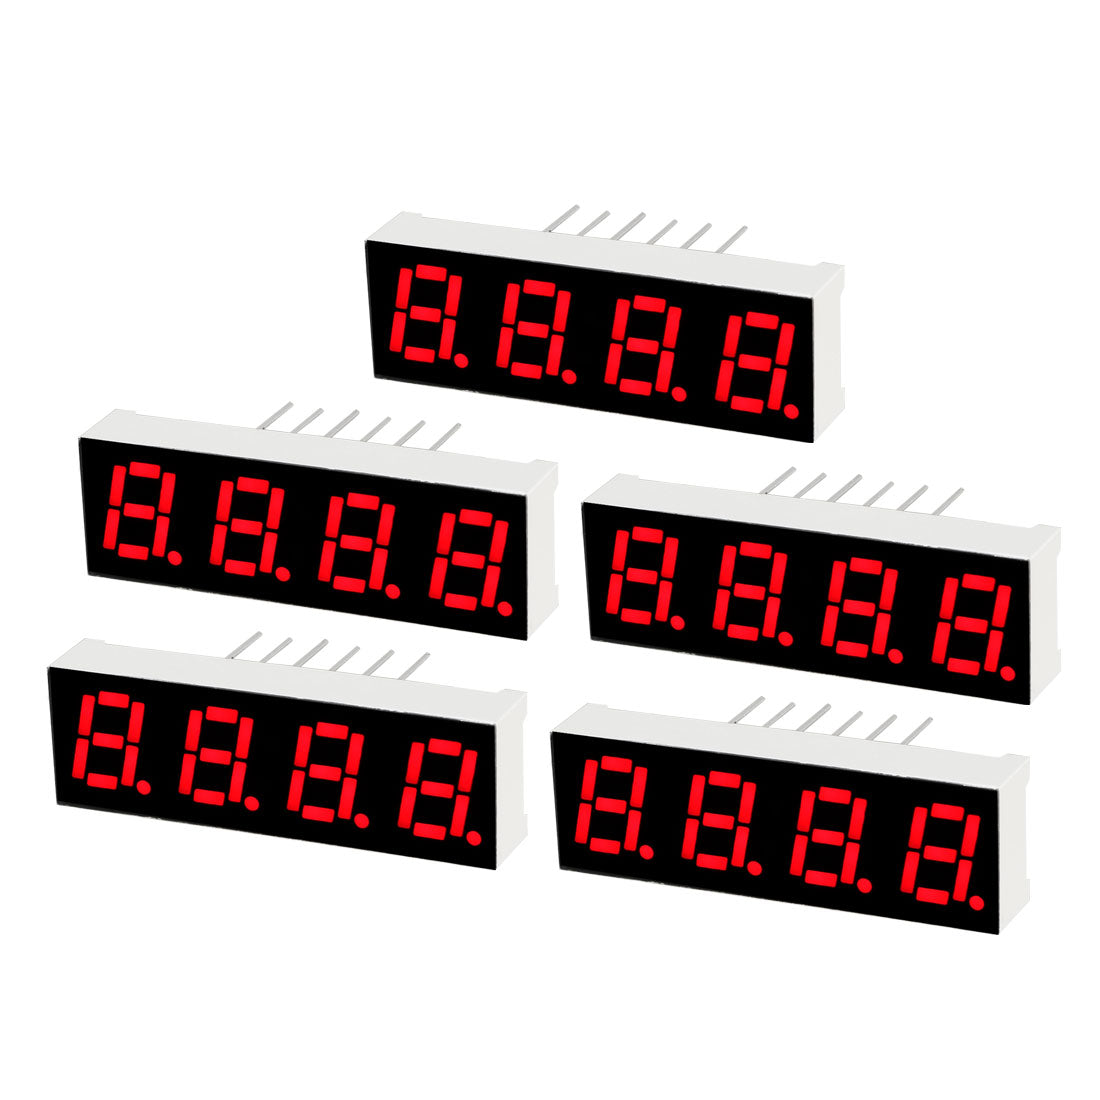 uxcell Uxcell Common Cathode 12 Pin 4 Bit 7 Segment 1.26 x 0.39 x 0.23 Inch 0.3" Red LED Display Digital Tube 5pcs